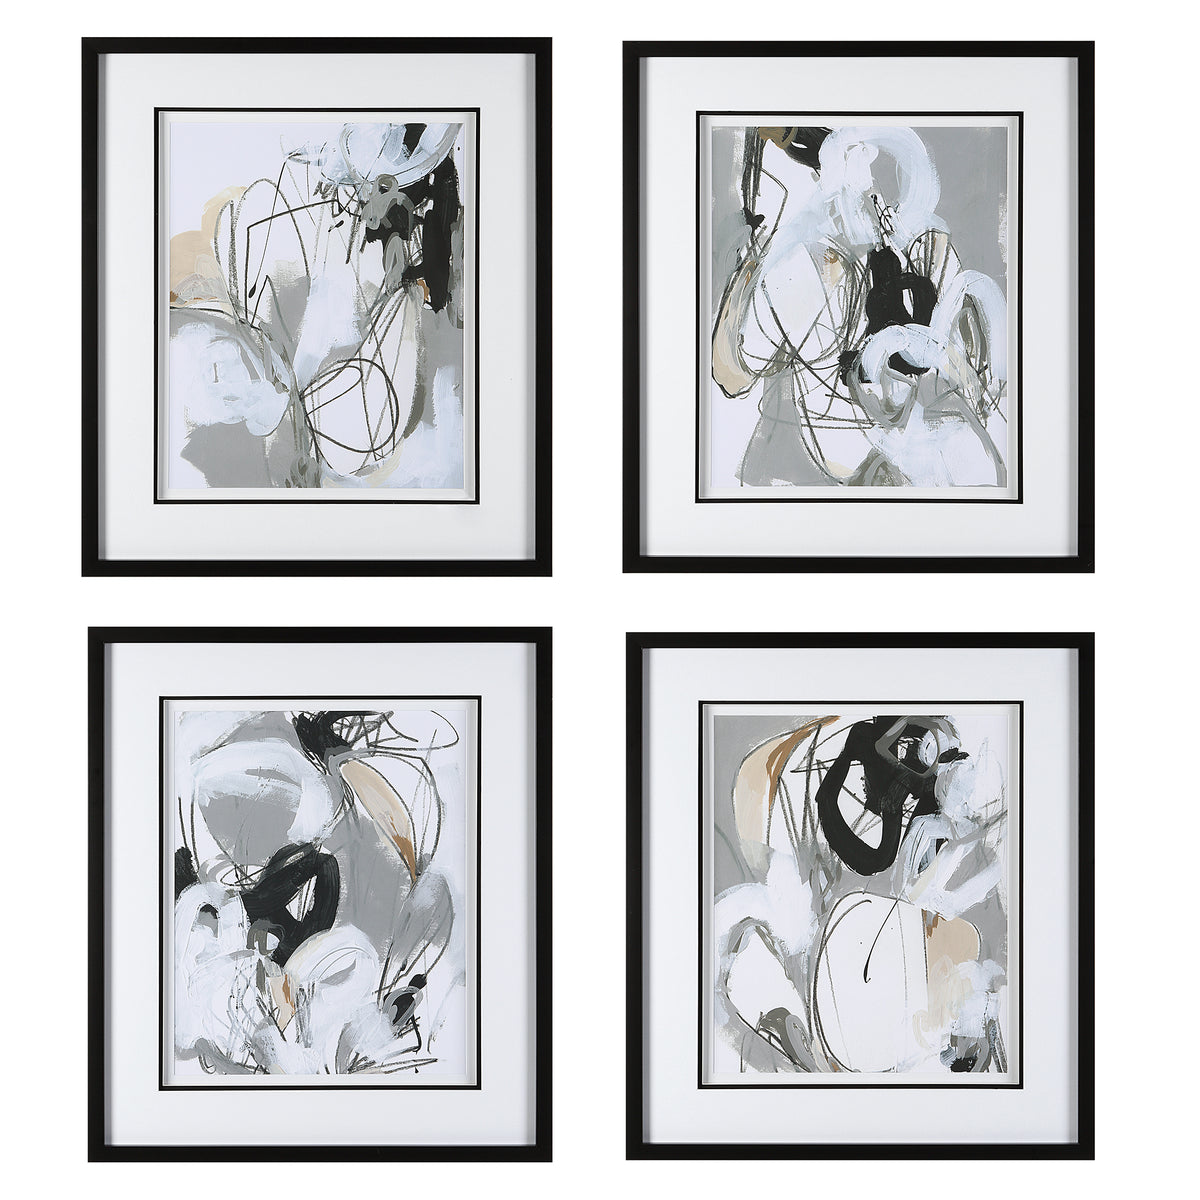 Tangled Threads Abstract Framed Prints, S/4